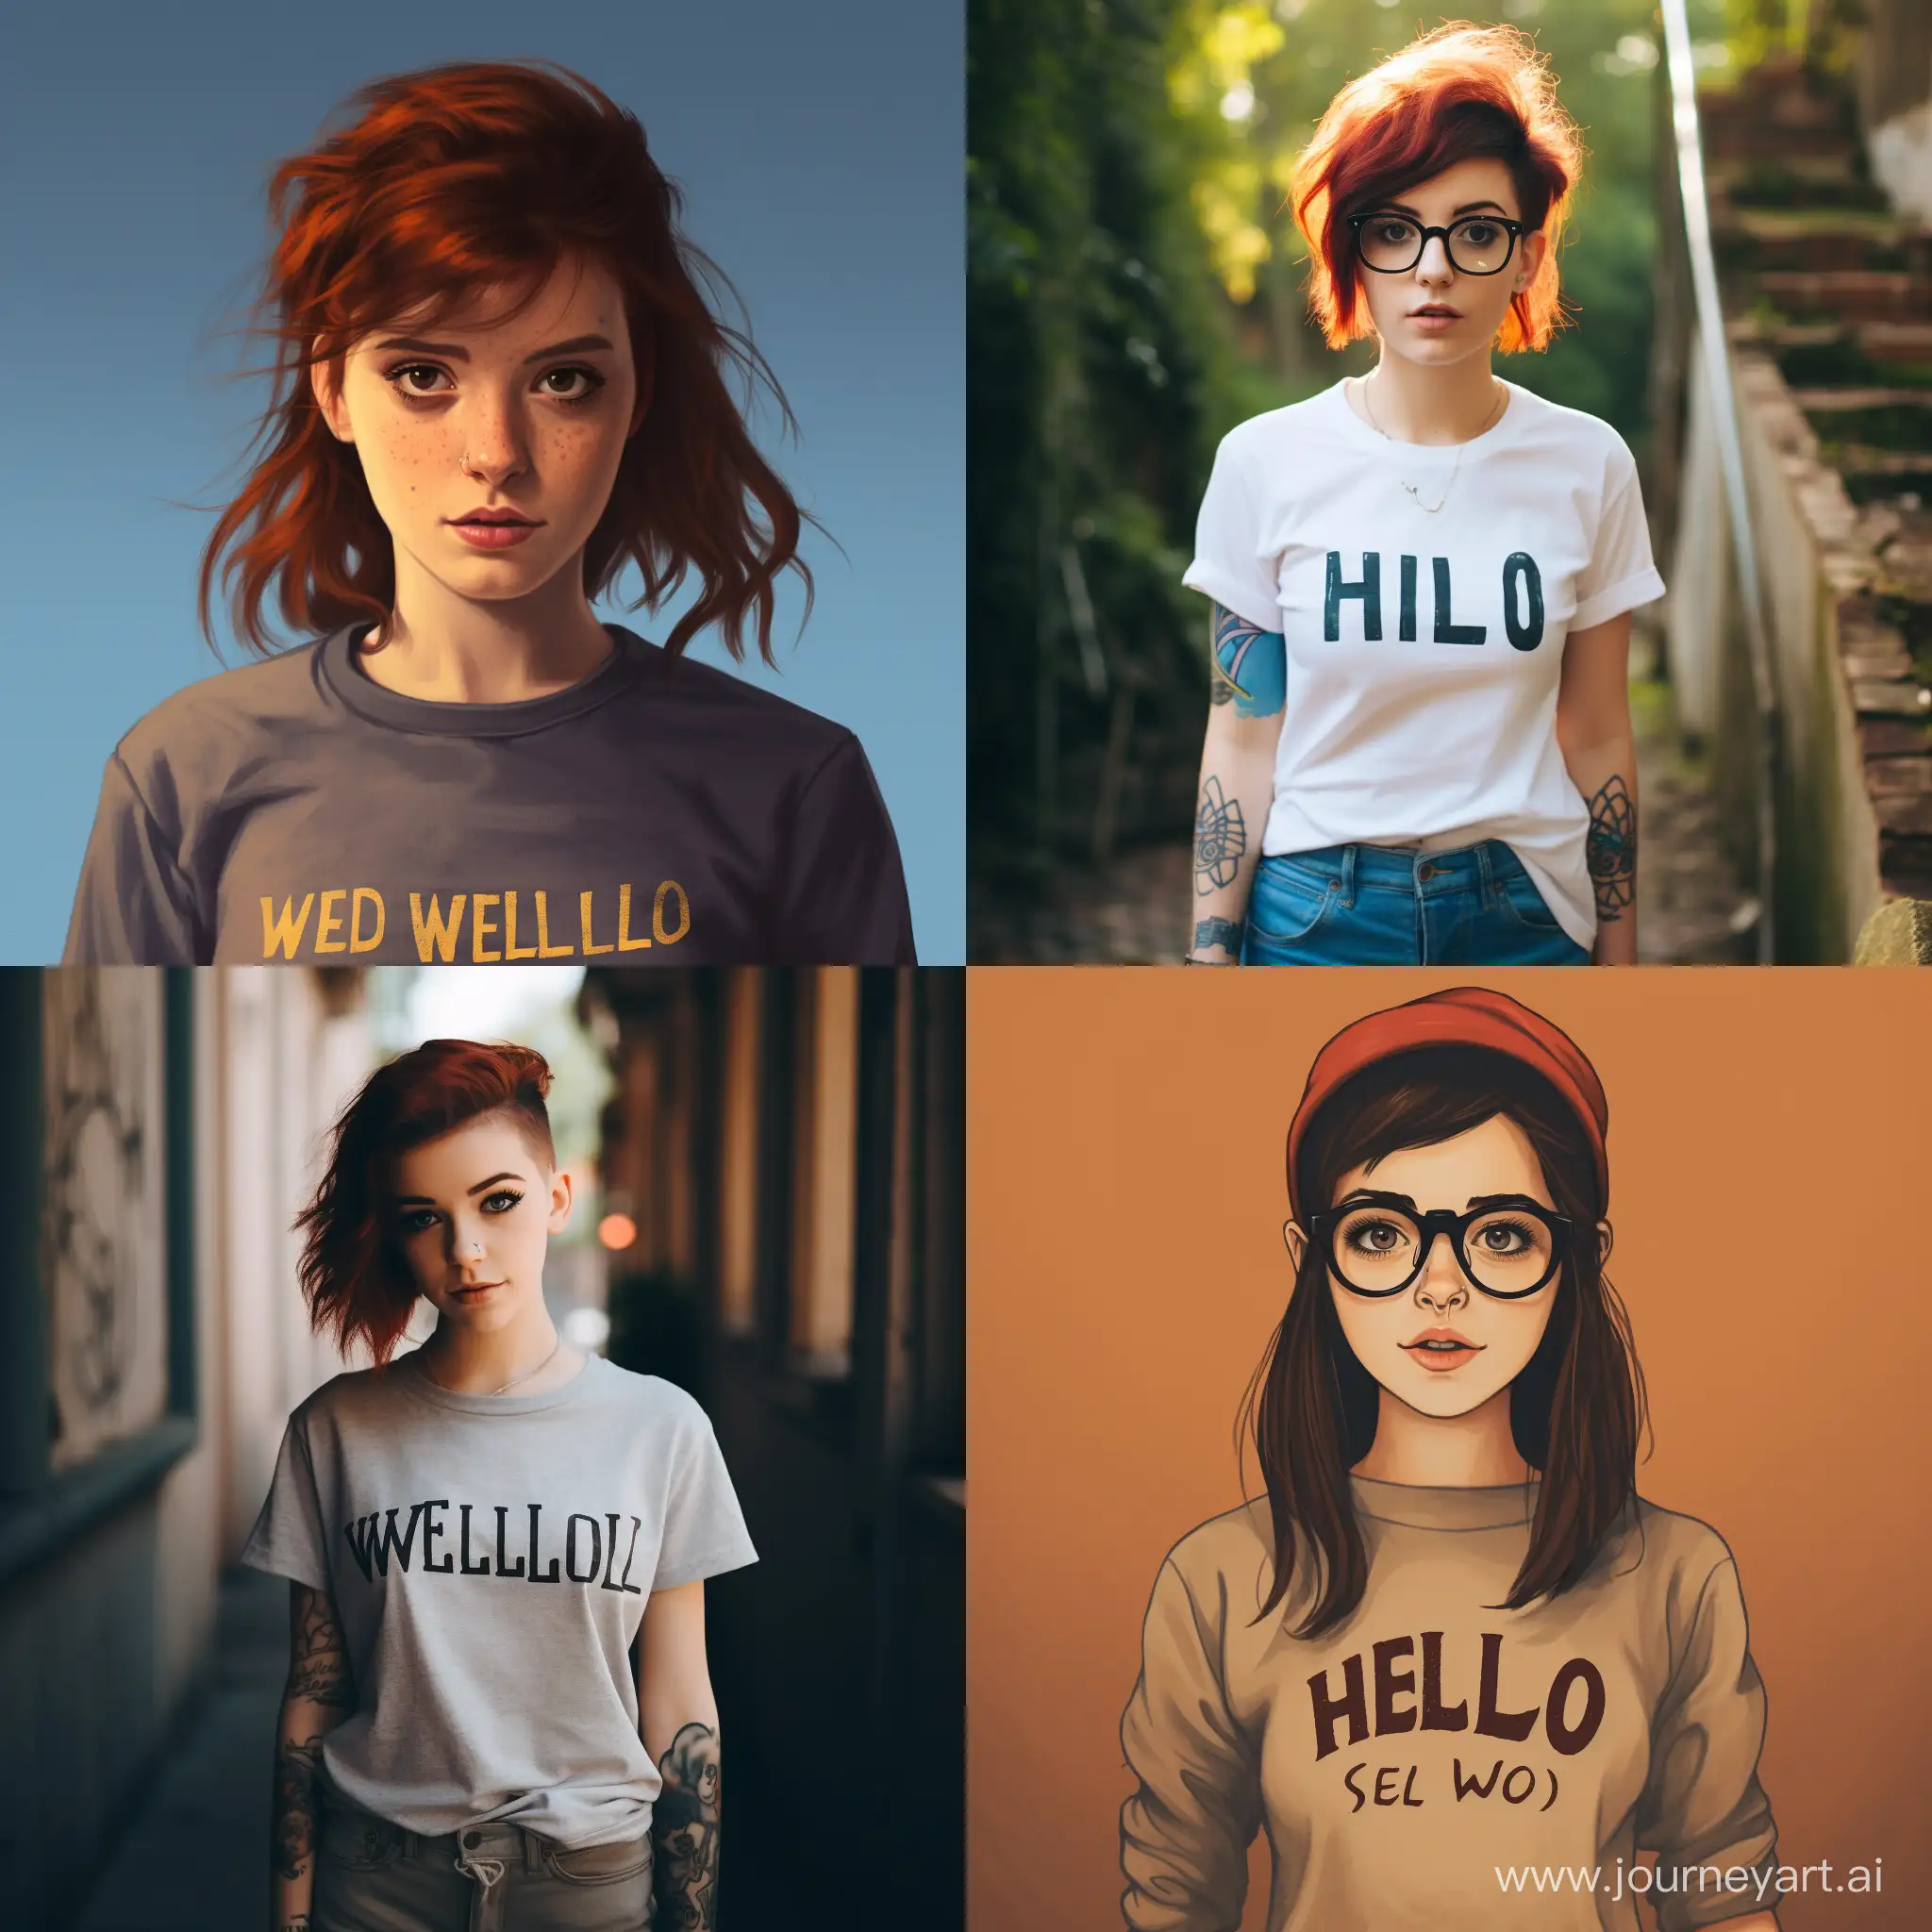 a girl wearing a shirt that says "hello world"